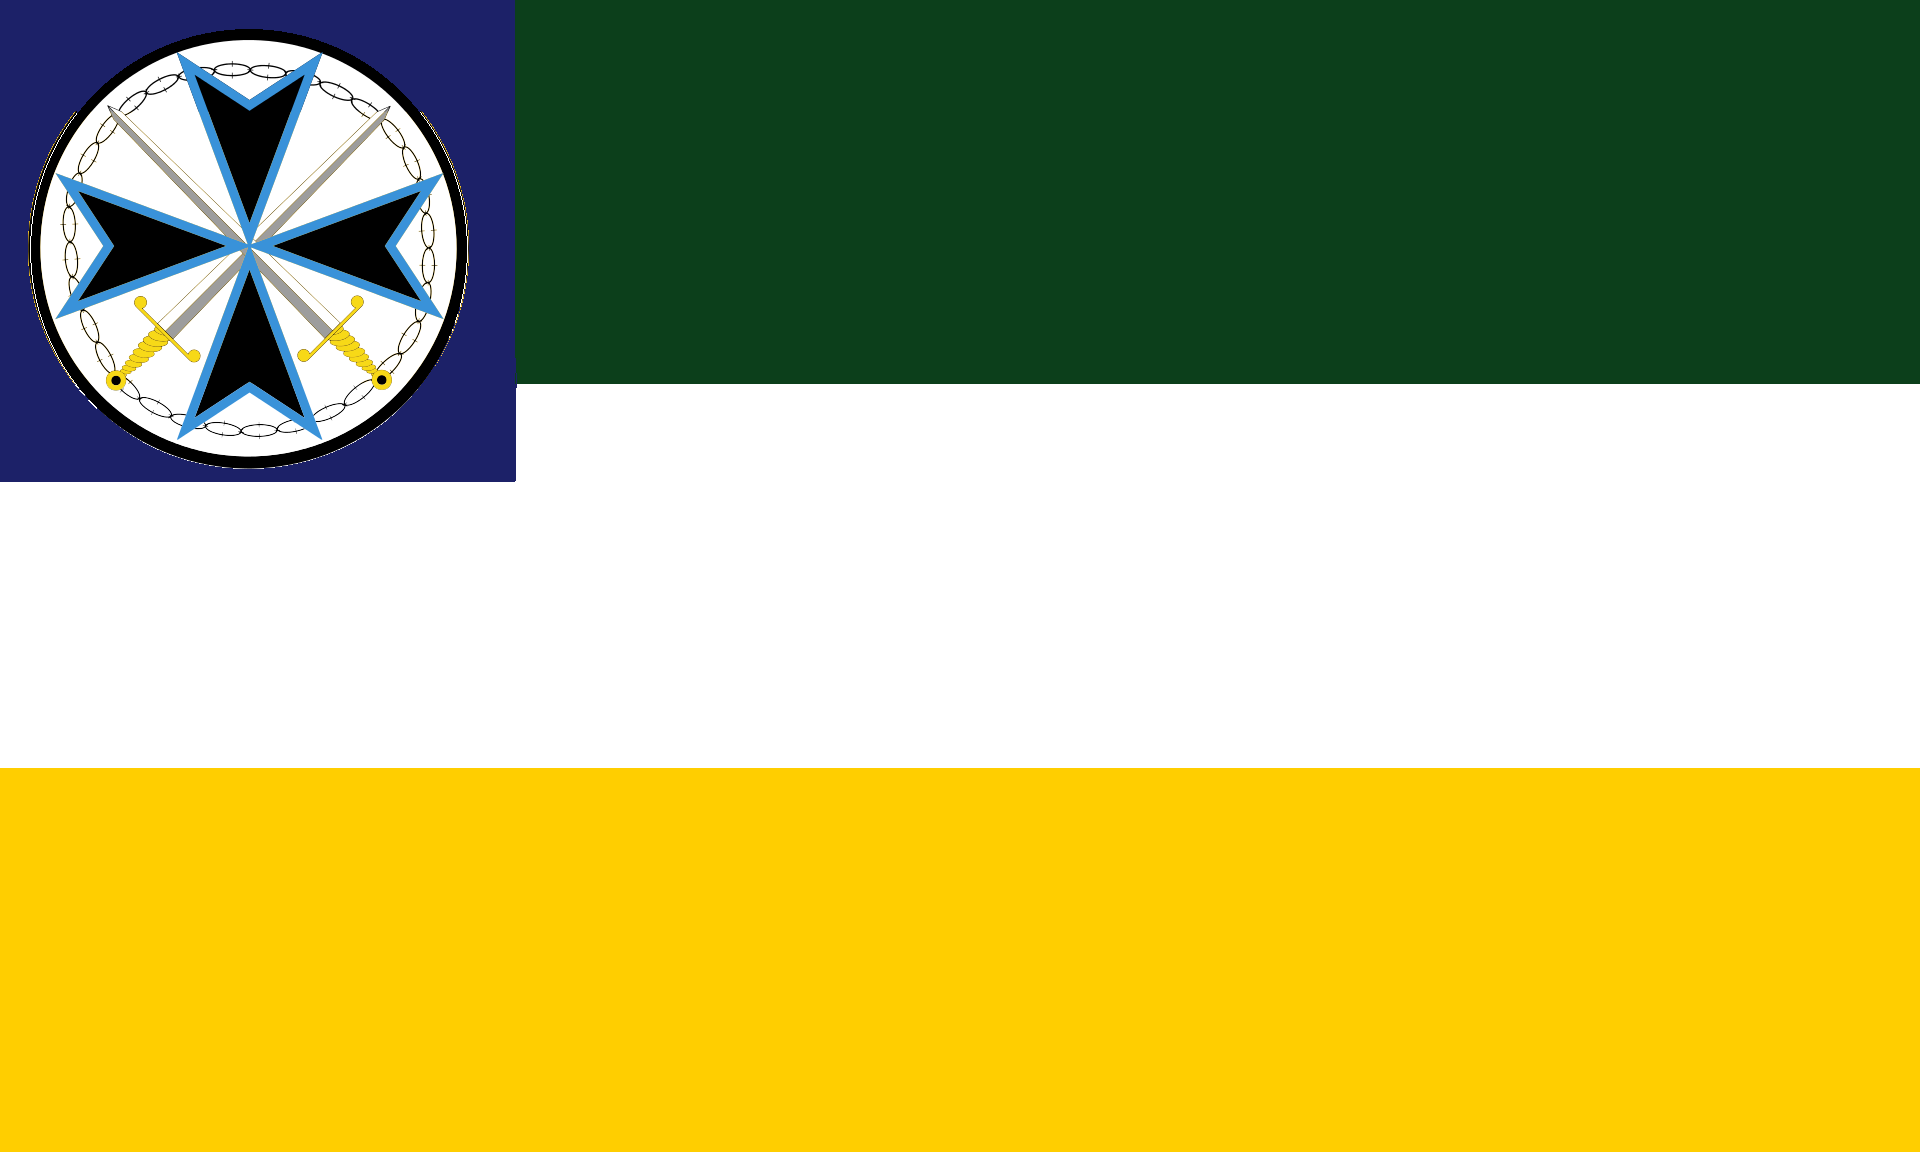 1920px-Flag_of_the Kingdom of Ireland.png